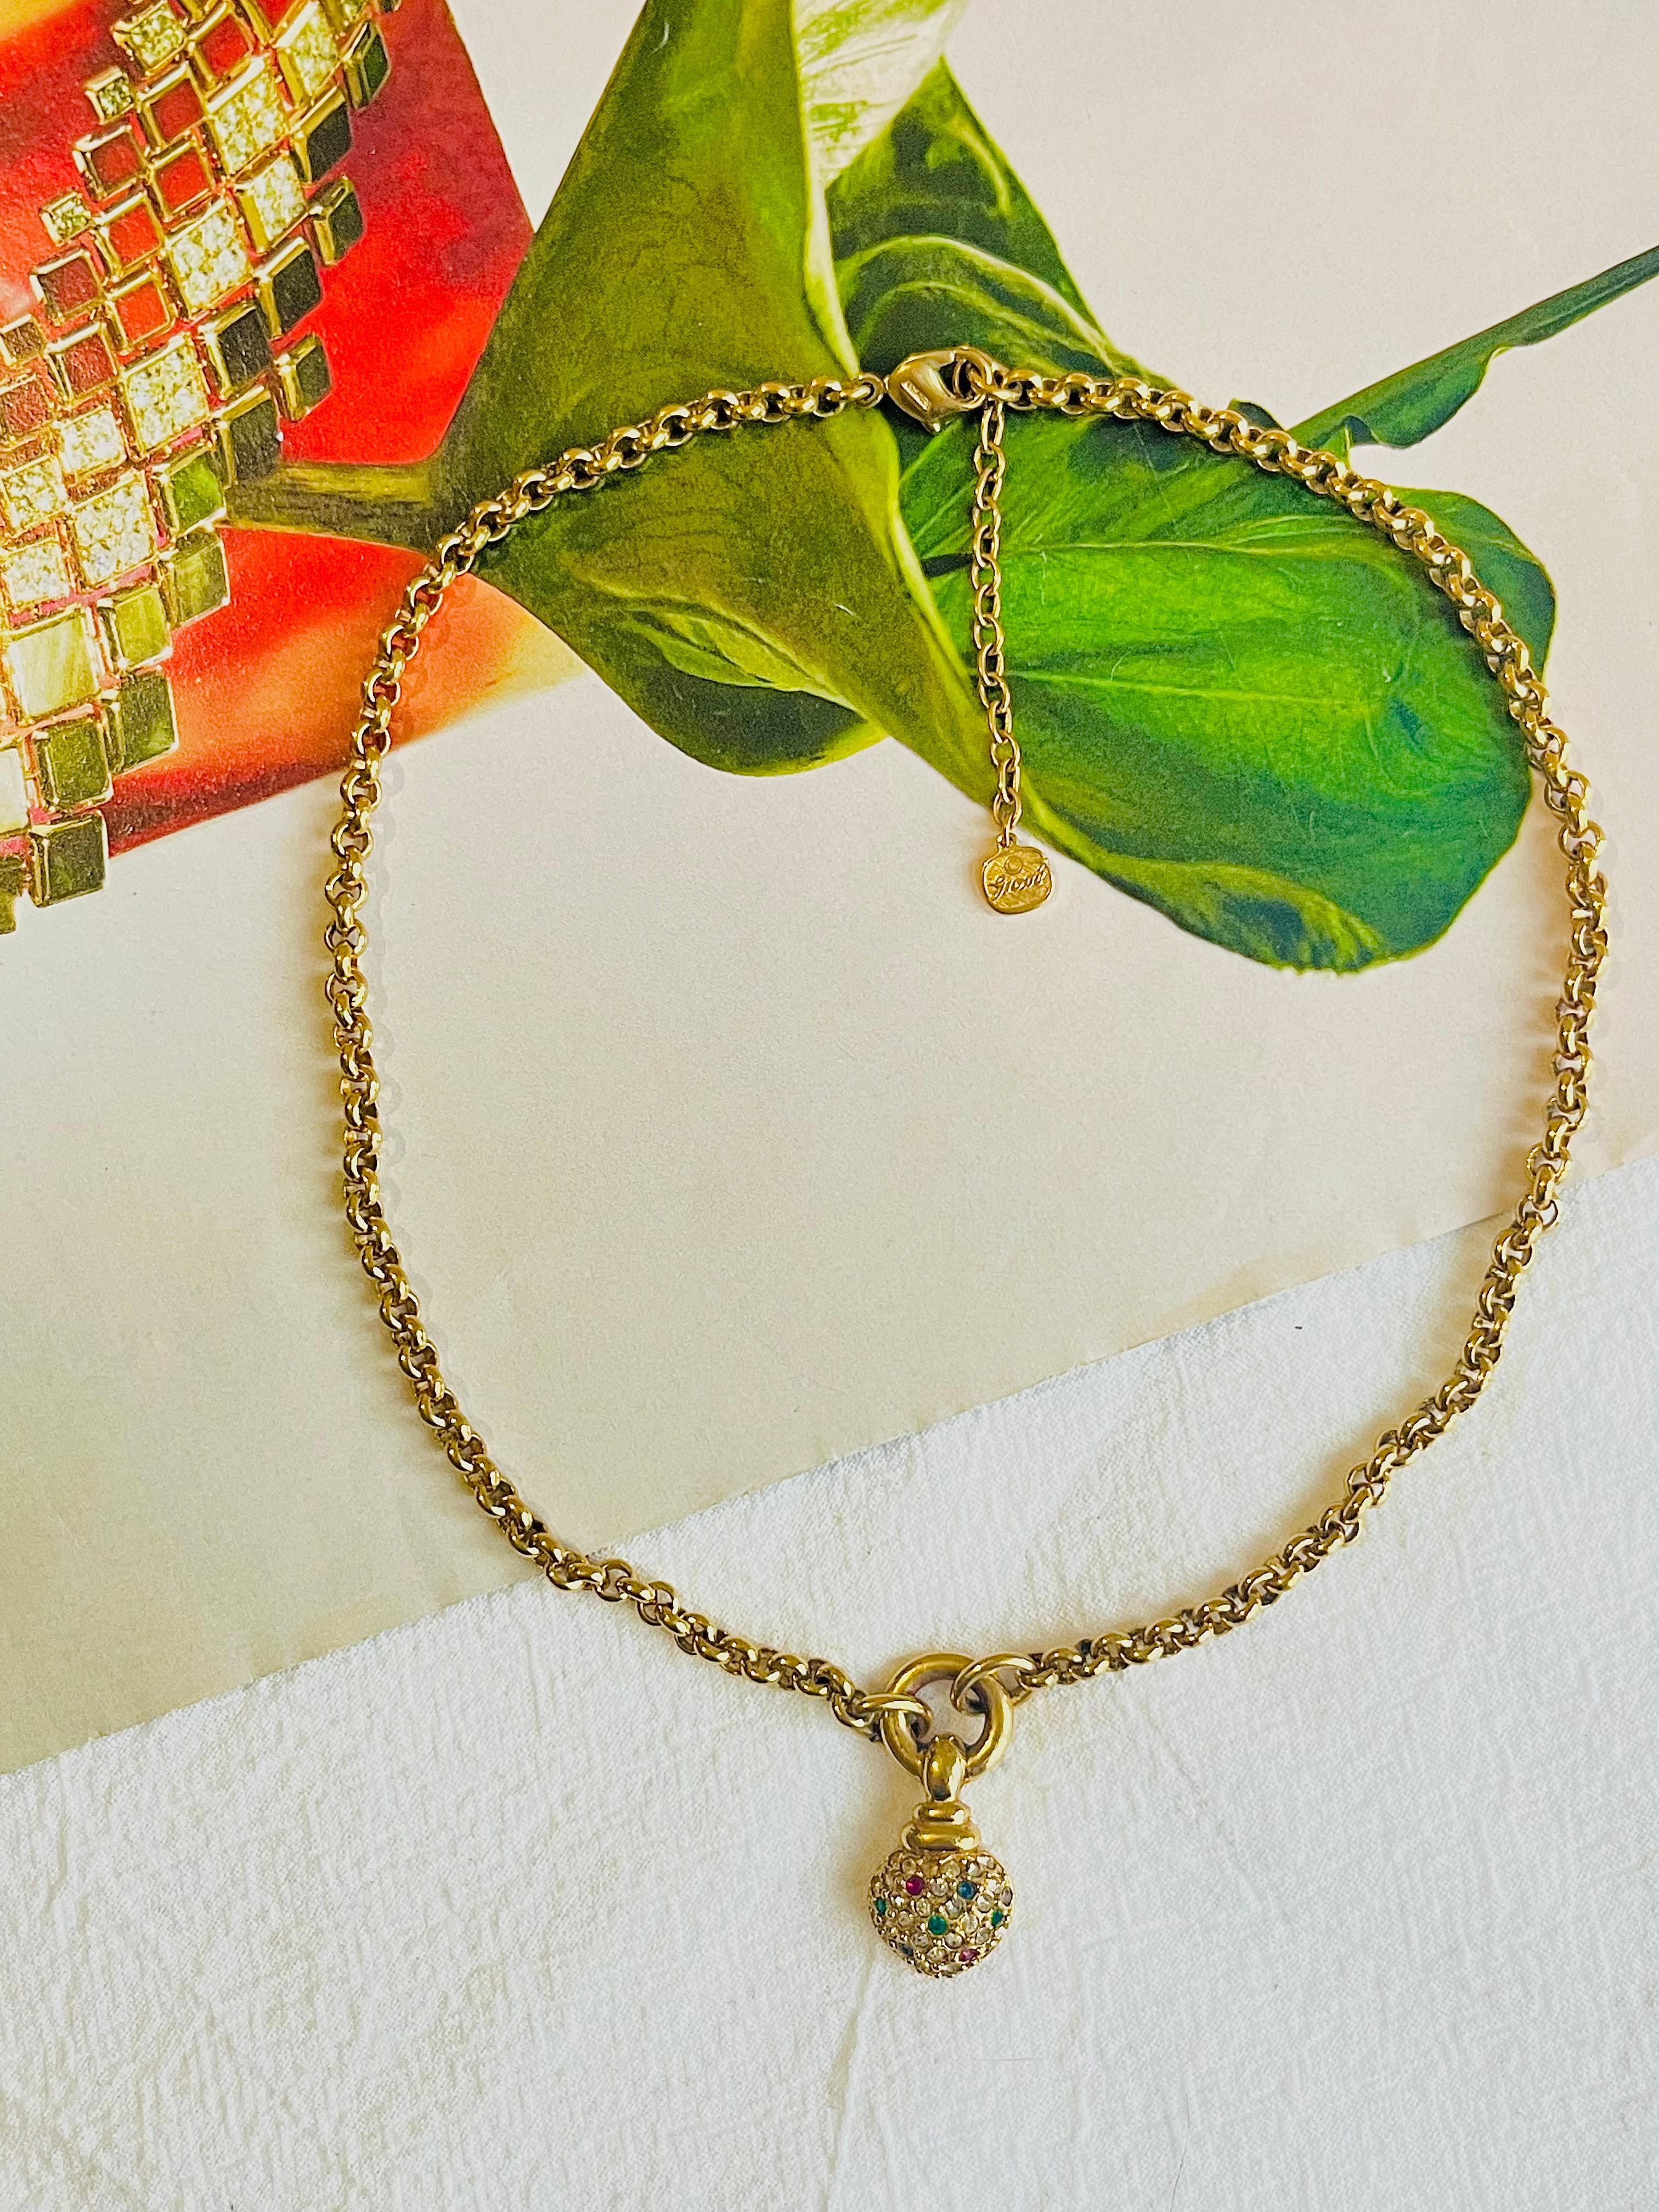 Very good condition. 100% Genuine. 

Size: 34 cm. Extend chain: 6 cm. Pendant: 2.3*2.7 cm.

Weight: 20 g.

_ _ _

Great for everyday wear. Come with velvet pouch and beautiful package.

Makes the perfect gift for Teens, Sisters, Friends,